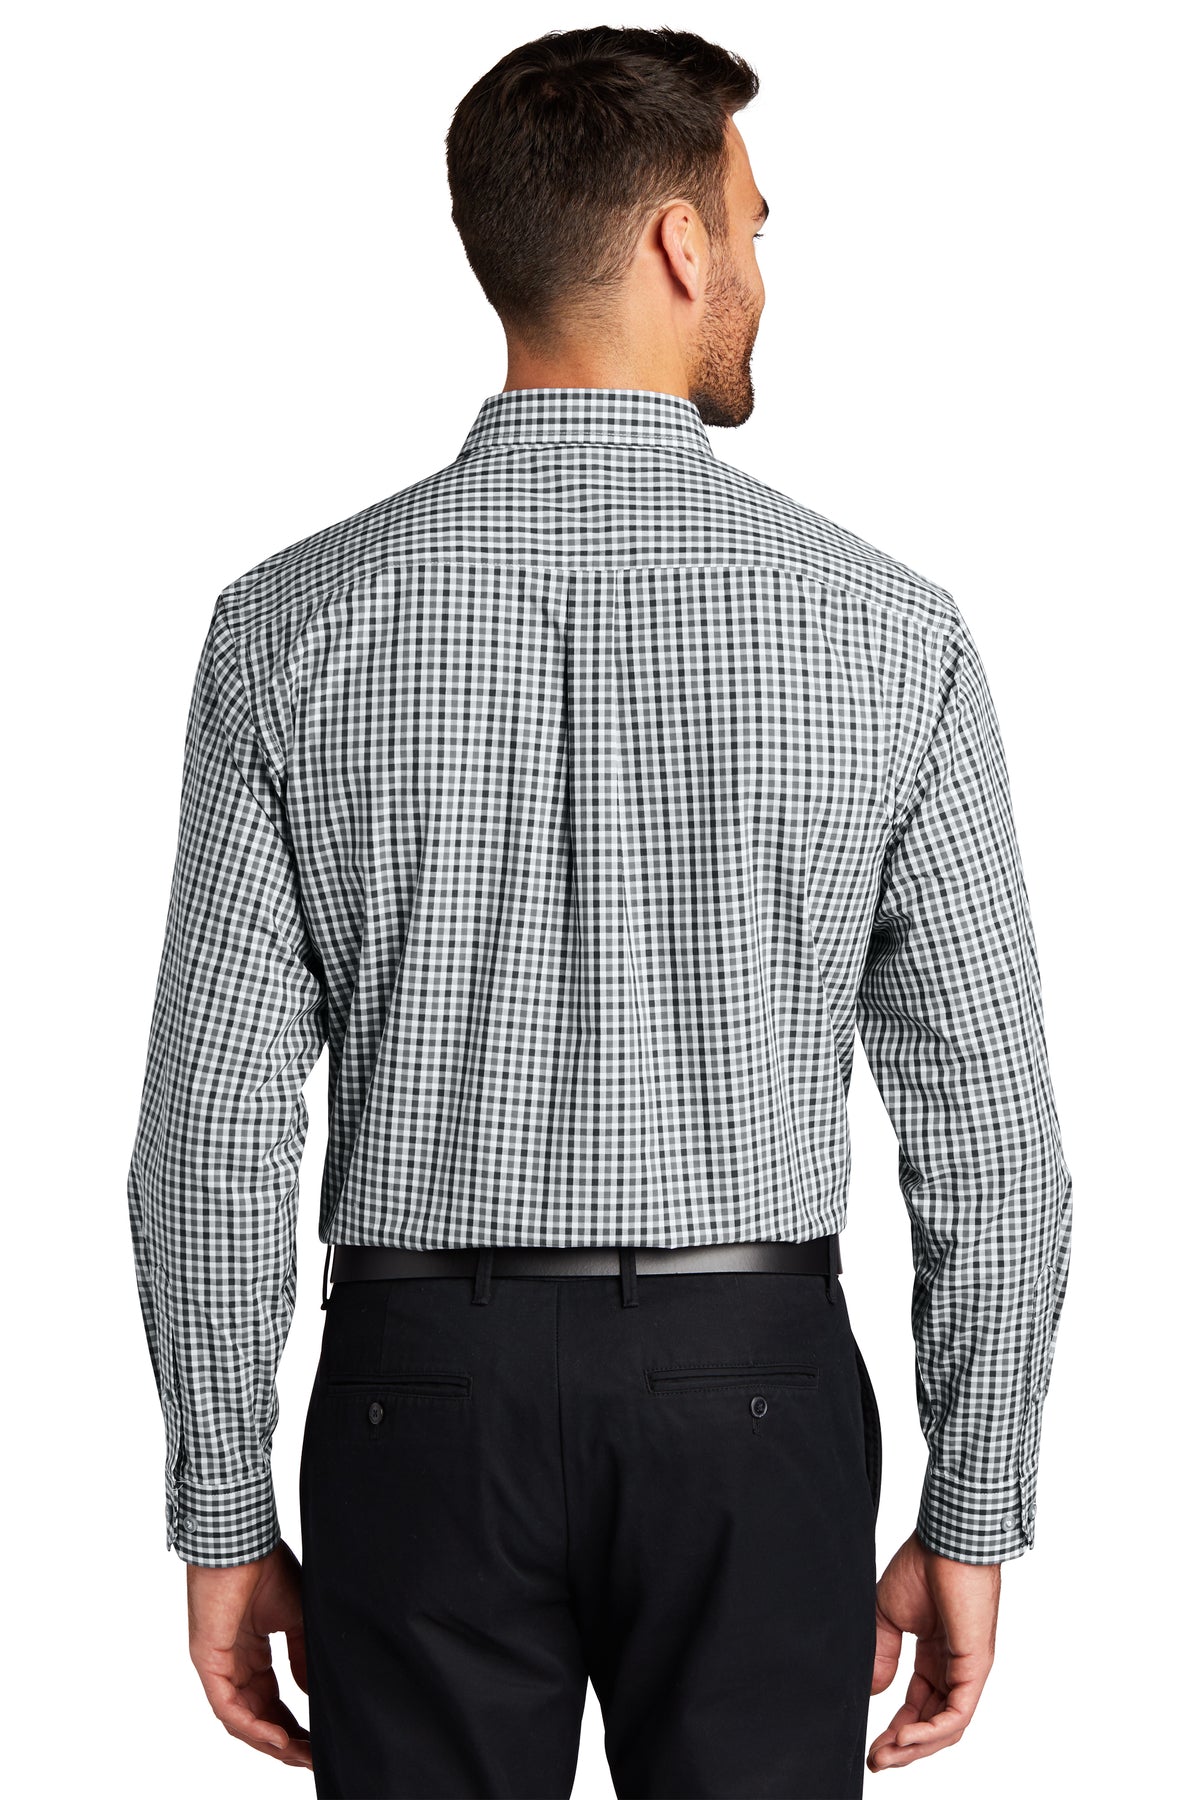 port authority_s654 _black/ charcoal_company_logo_button downs